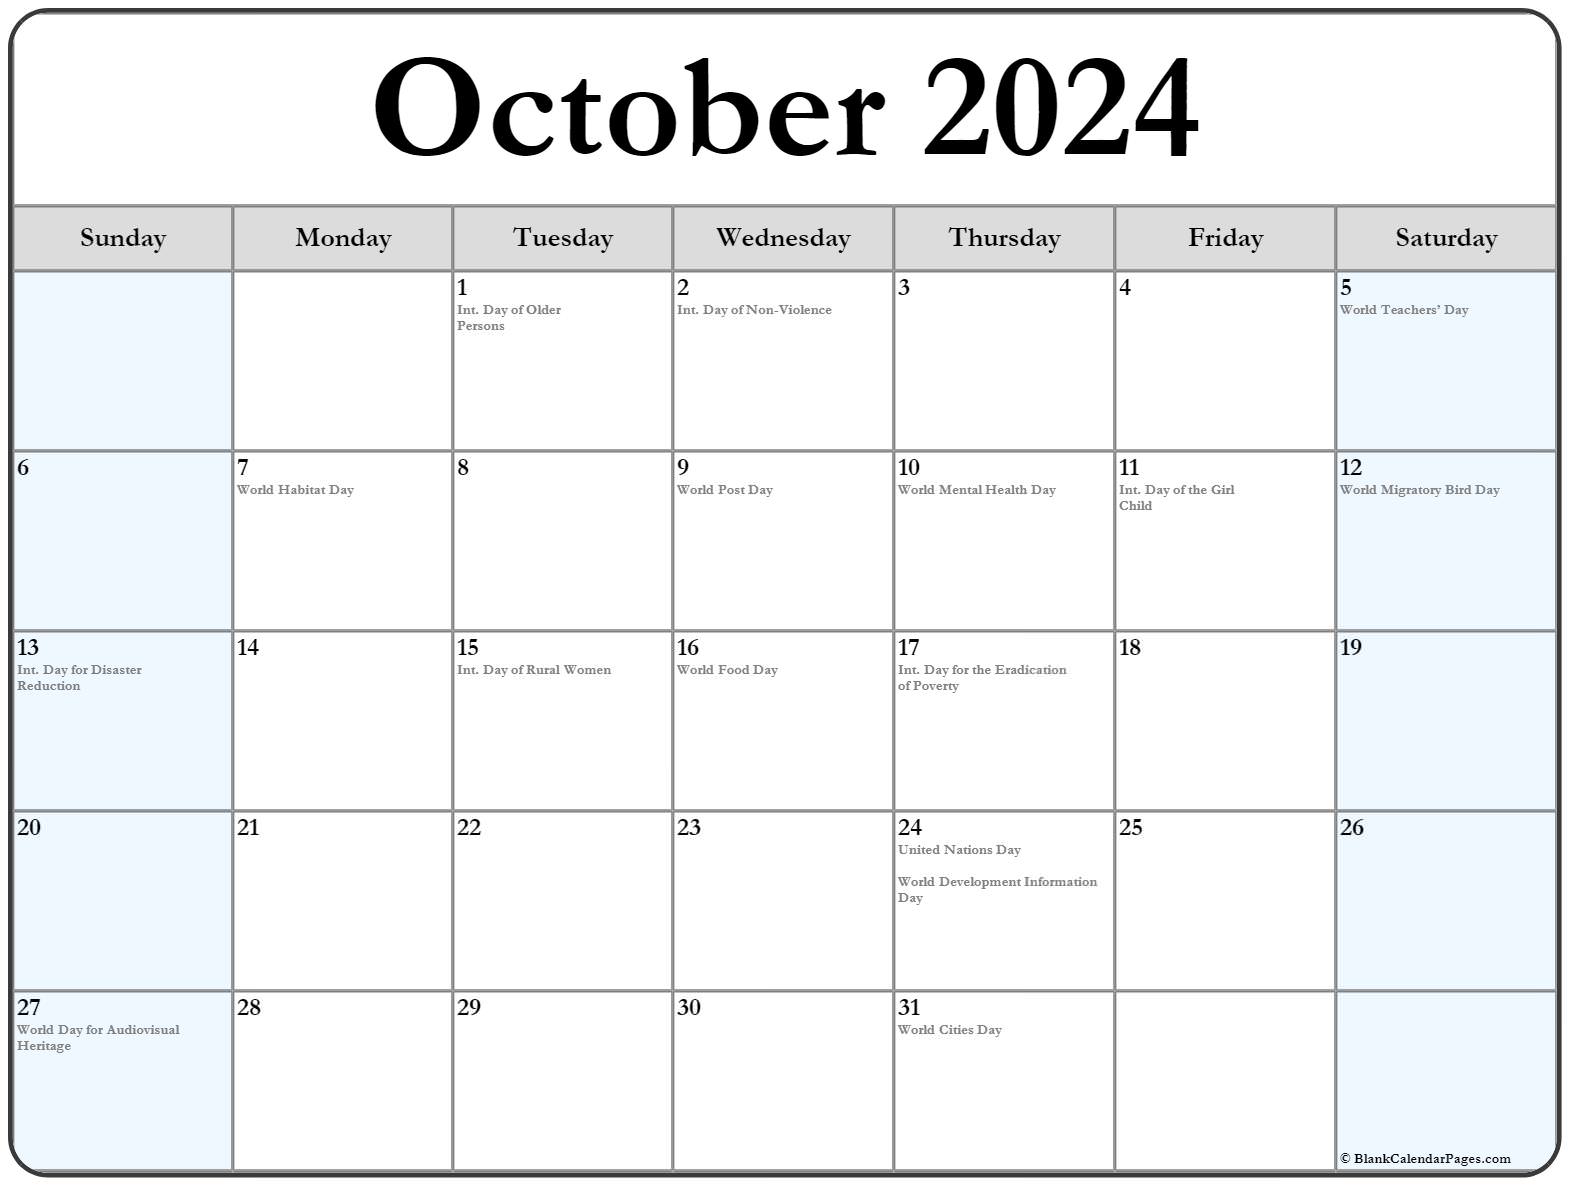 Collection Of October 2020 Calendars With Holidays